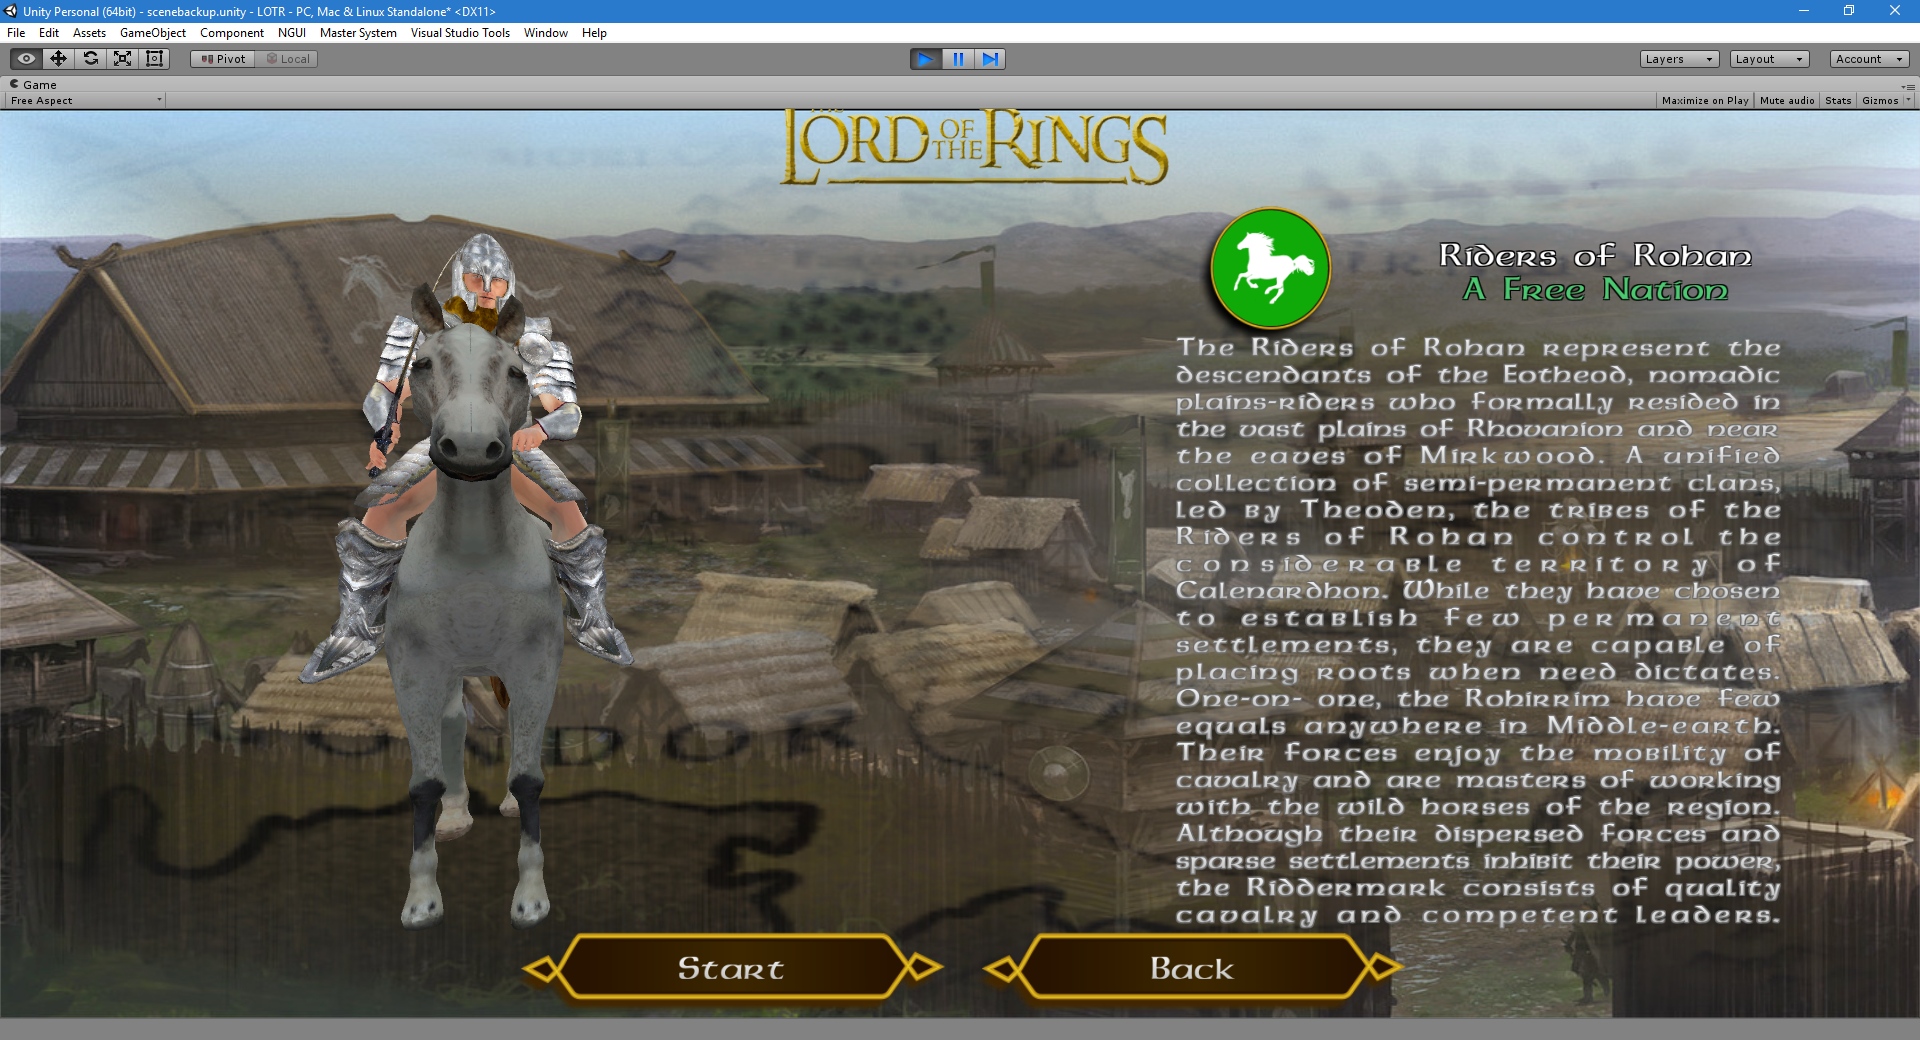 LOTR image - Lord of the Rings: The Strategy Game - Mod DB